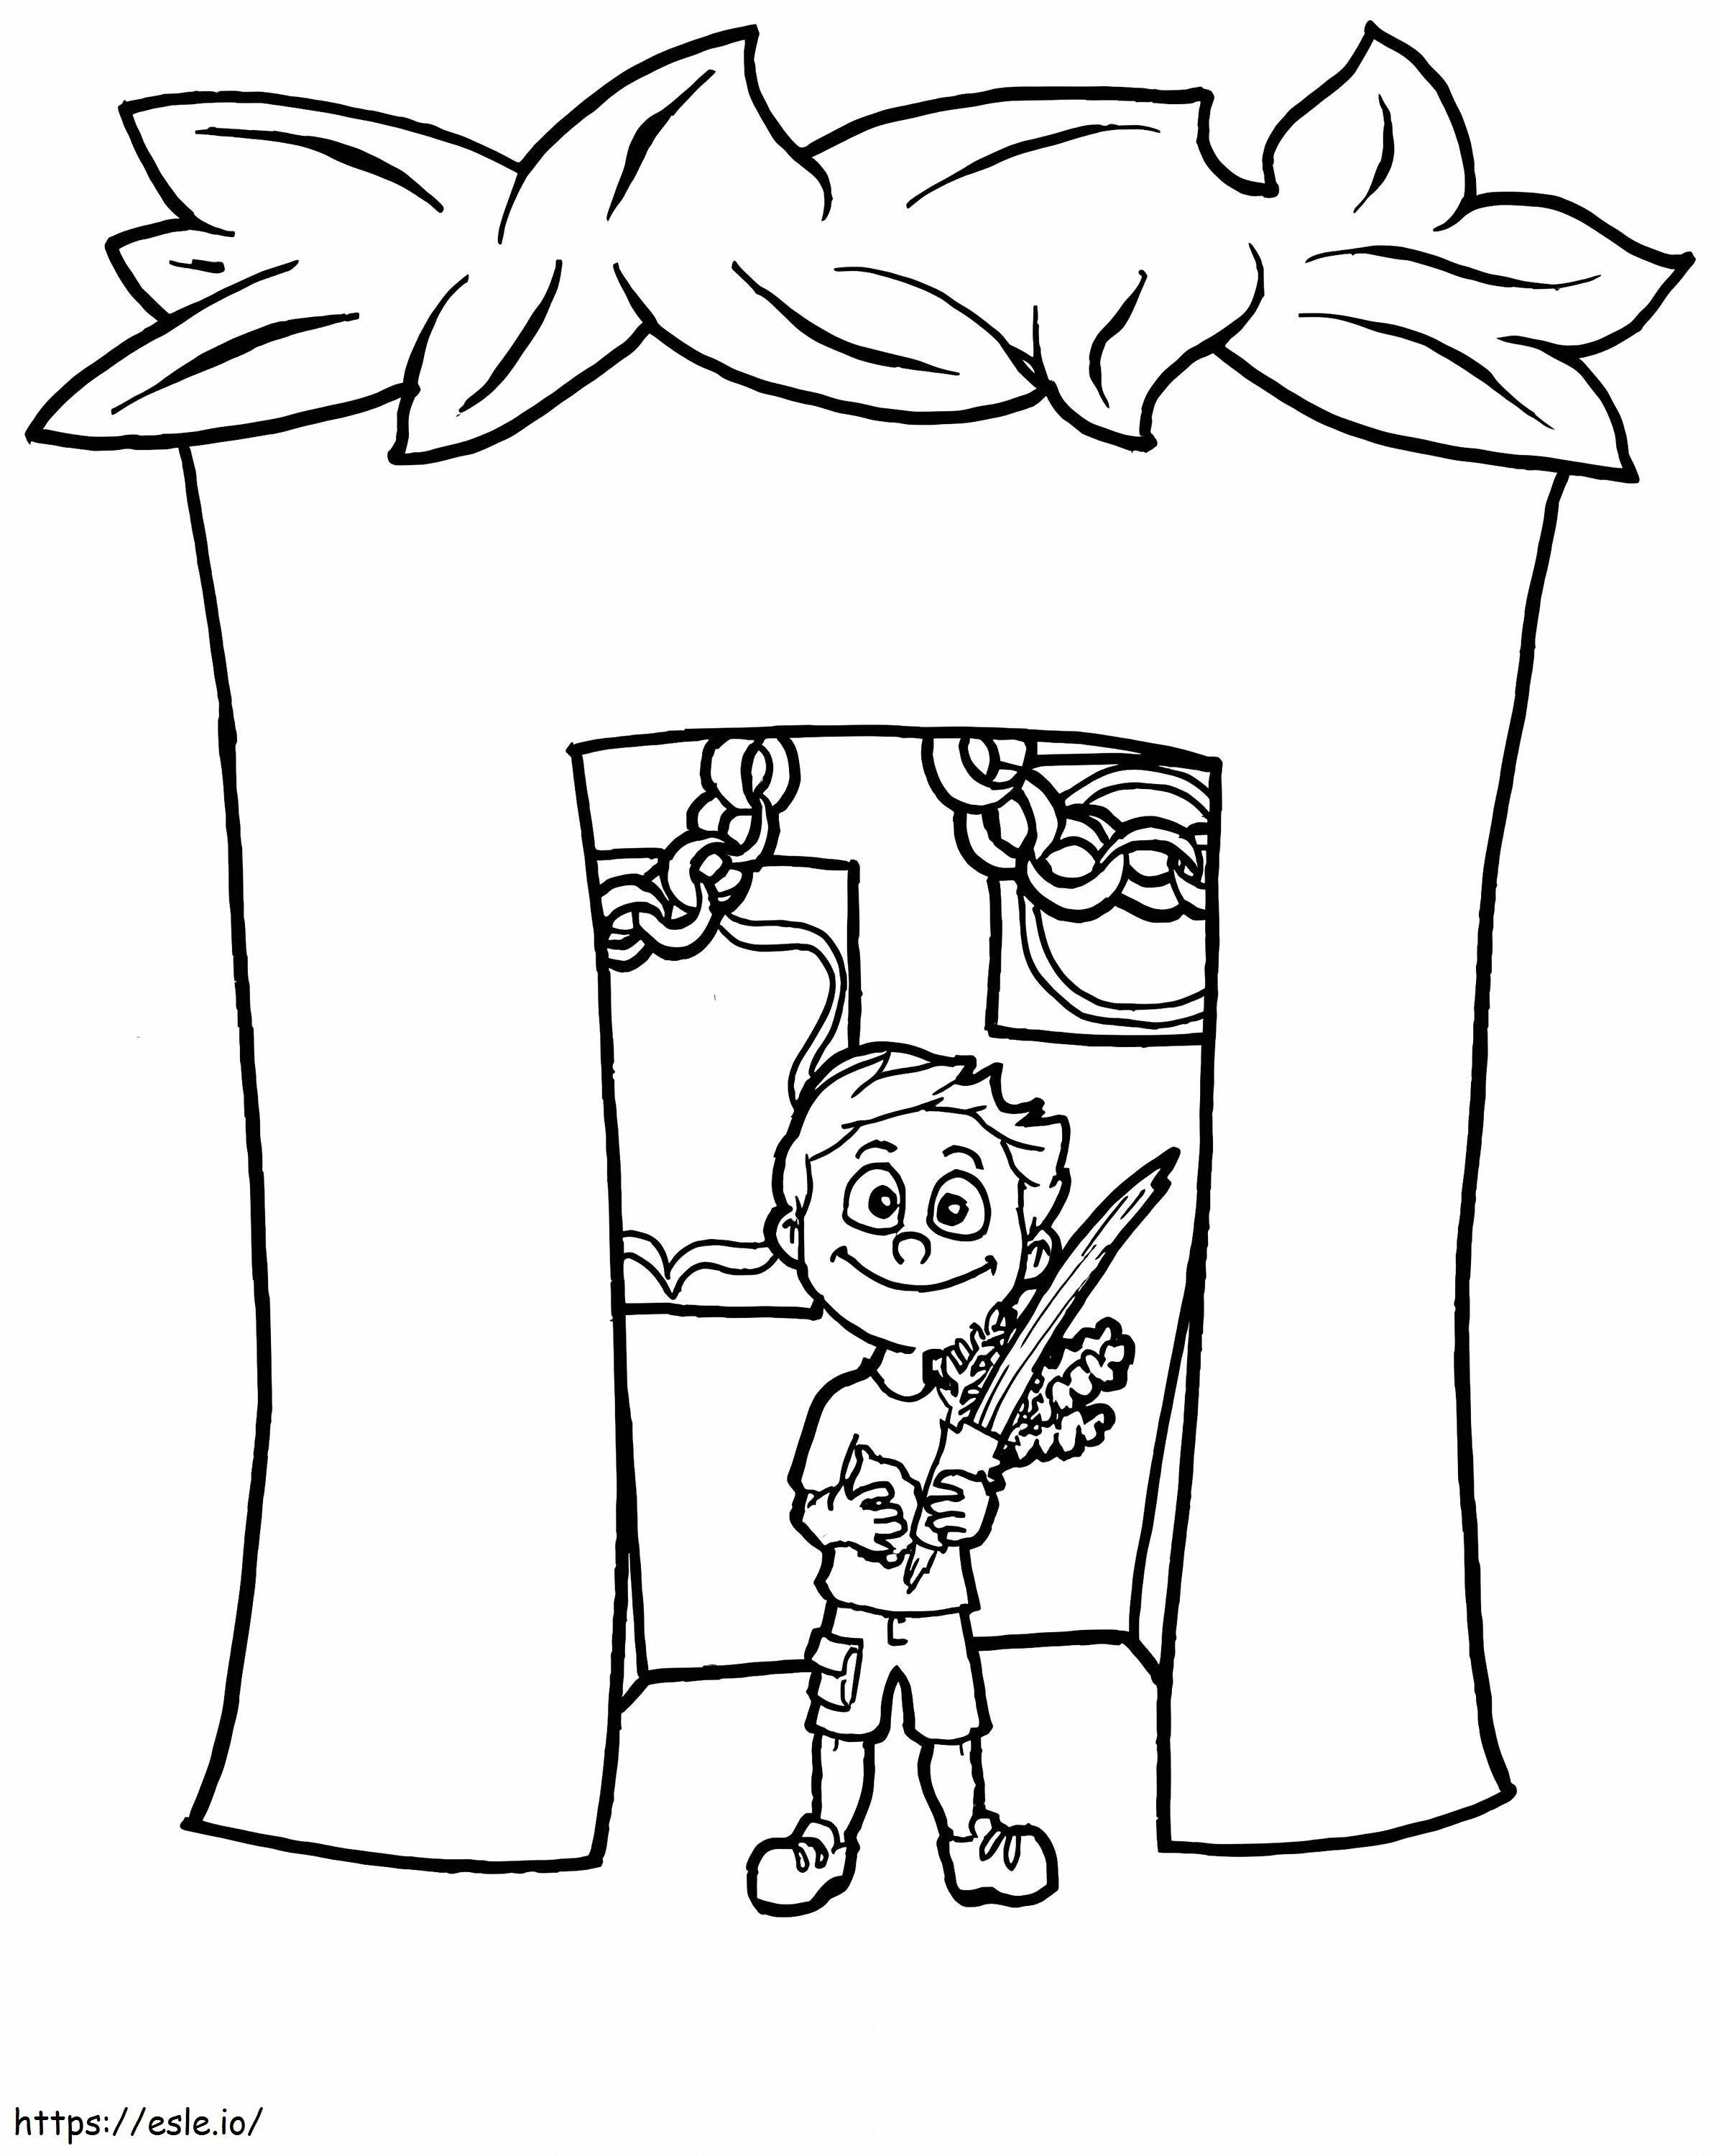 Socks 5 coloring page